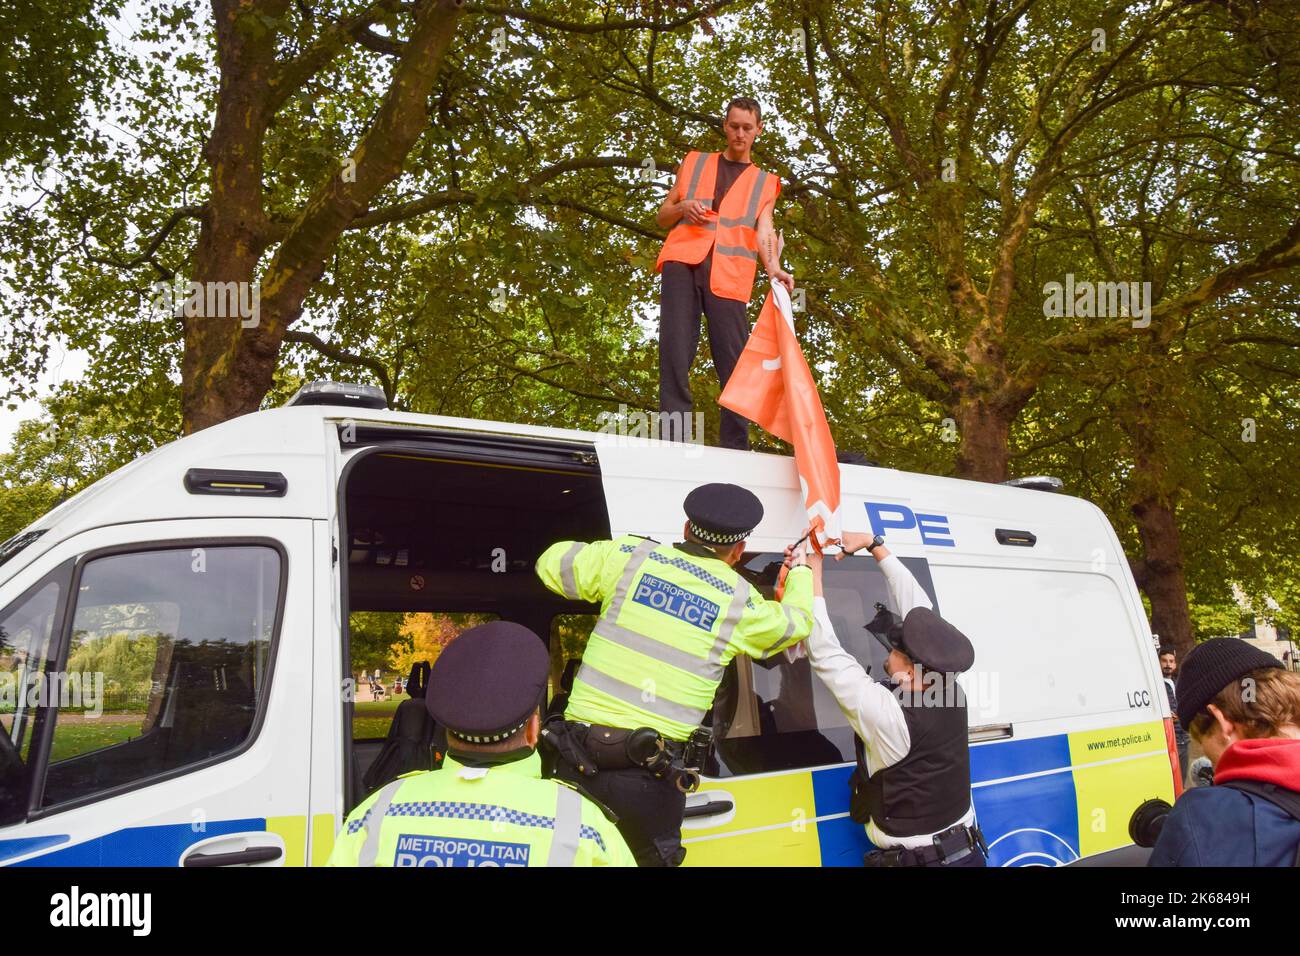 London, UK. 12th October 2022. A Just Stop Oil activist climbs on top of a police van outside Downing Street on Horse Guards Road, as the climate action group continues its daily protests demanding that the UK Government stops issuing new oil and gas licences. Credit: Vuk Valcic/Alamy Live News Stock Photo